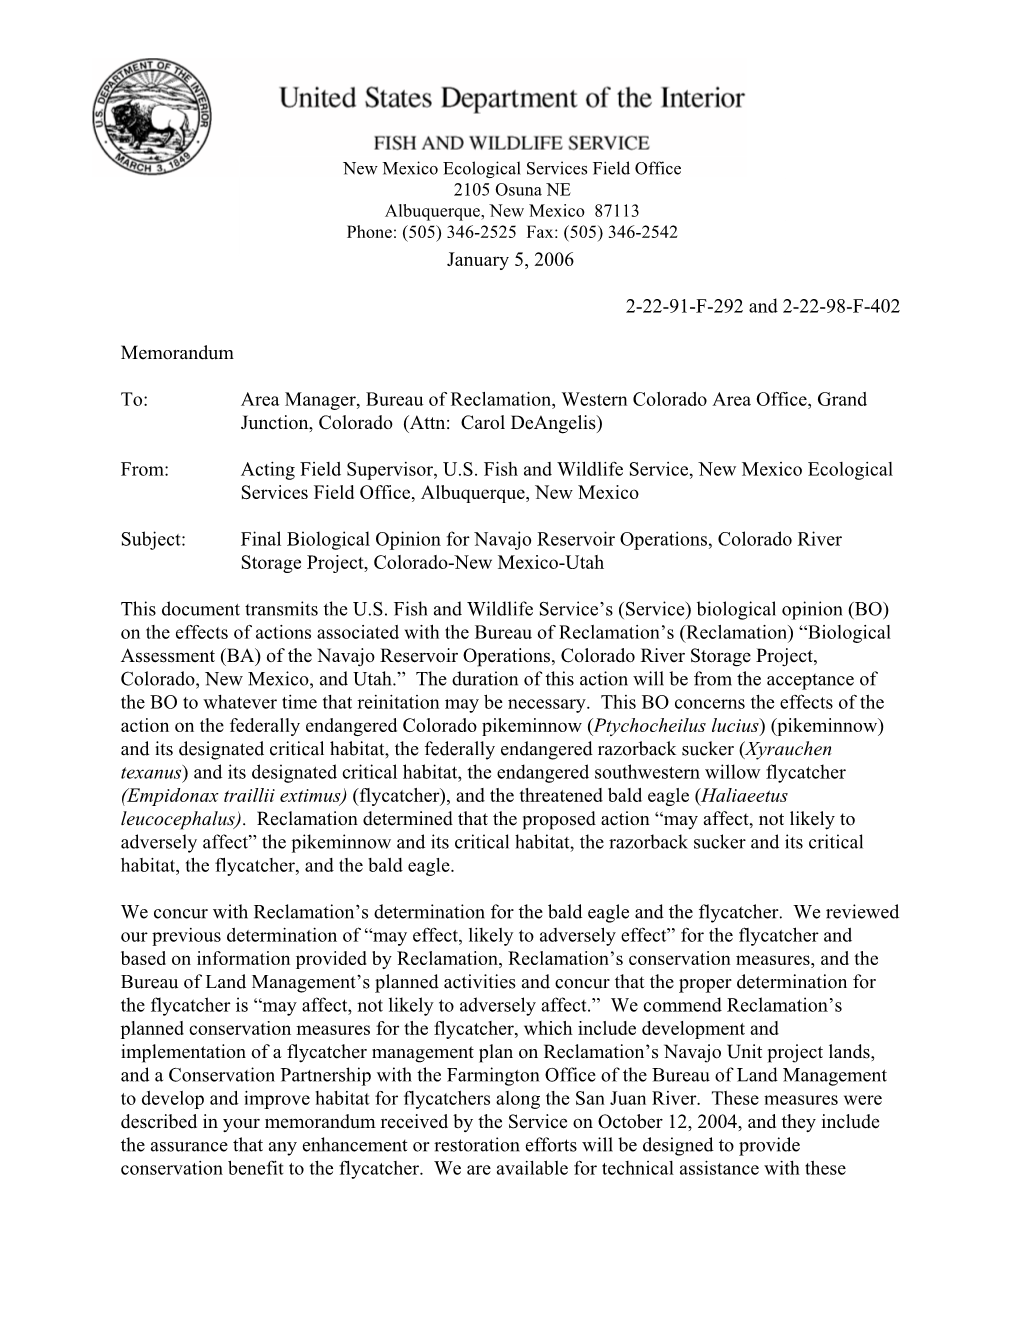 Final Biological Opinion for Navajo Reservoir Operations, Colorado River Storage Project, Colorado-New Mexico-Utah